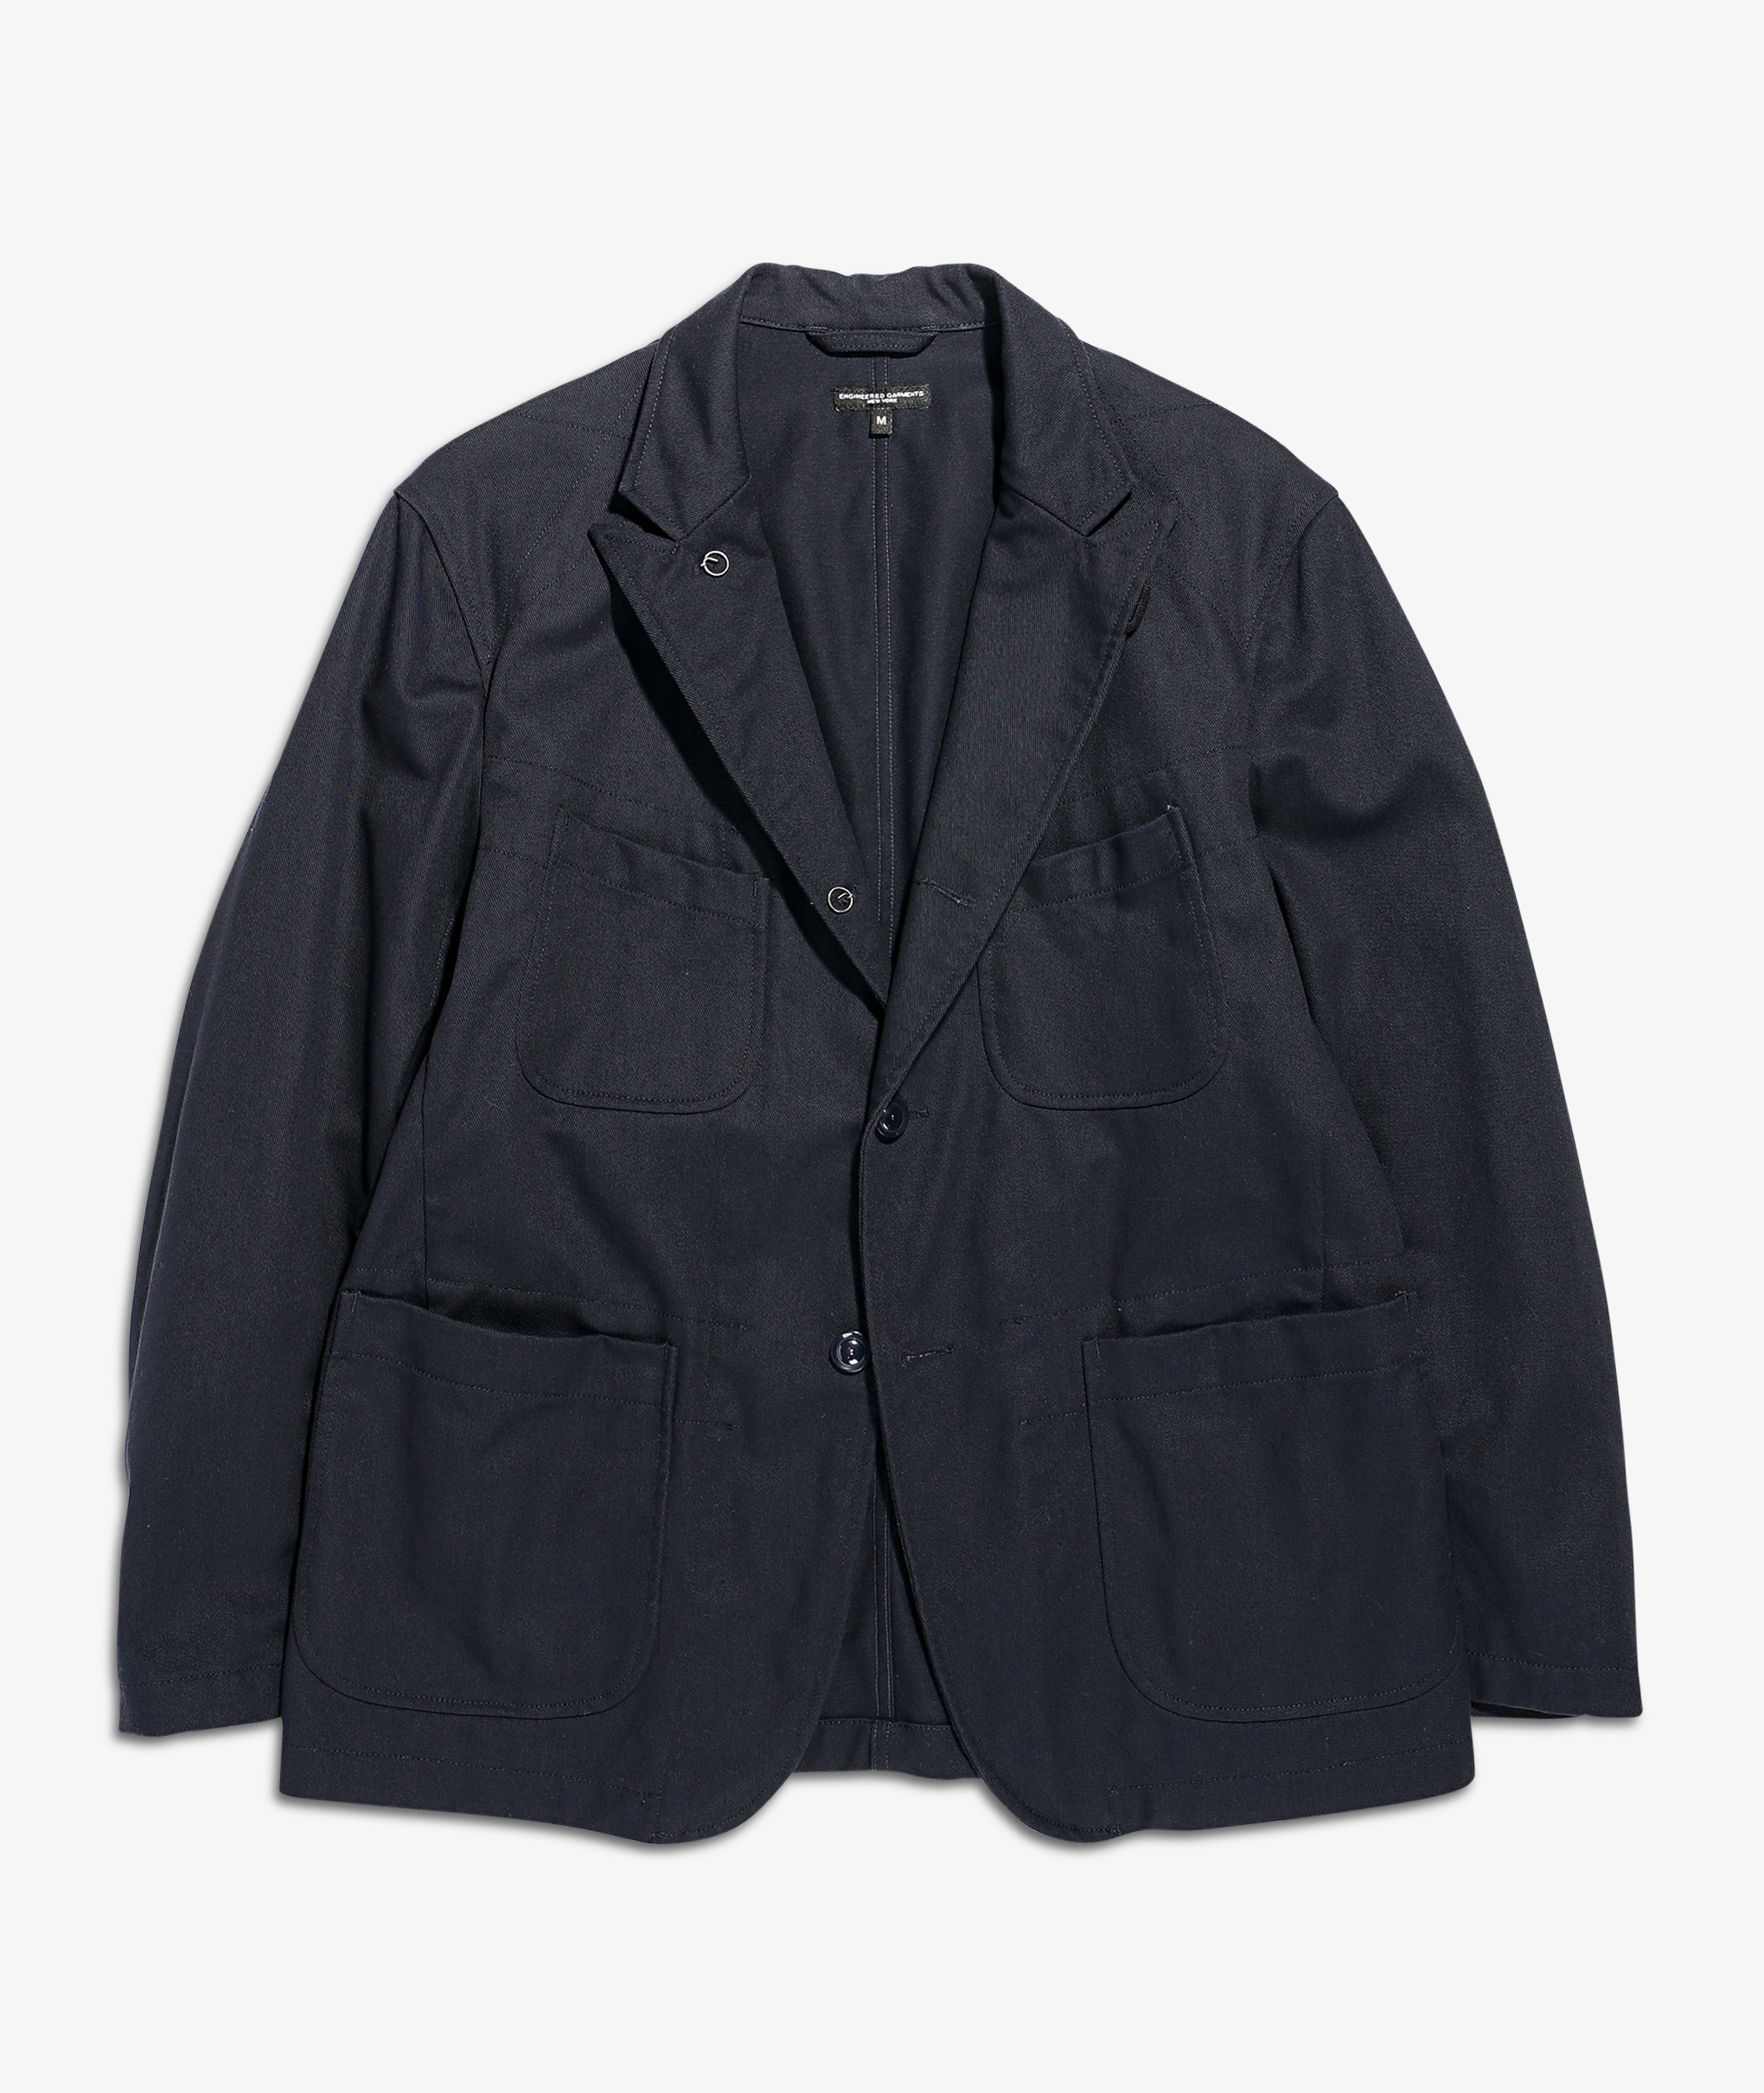 Norse Store | Shipping Worldwide - Engineered Garments